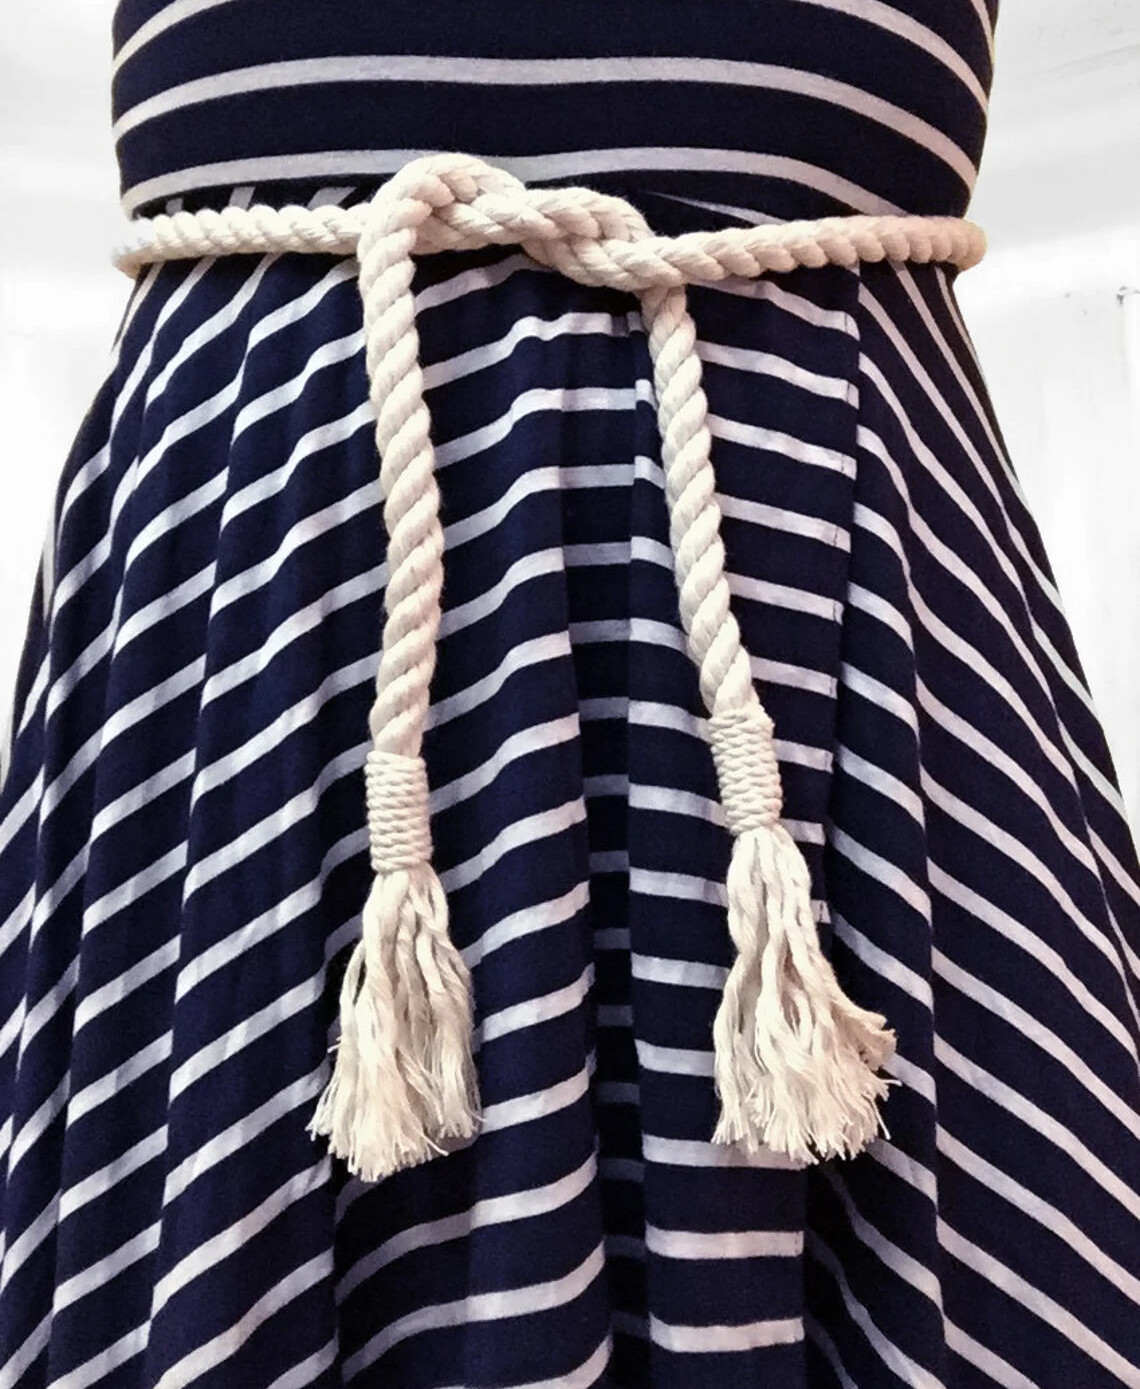 Nautical Rope Belt with Whipping Knot Ends - 1/2" Diameter